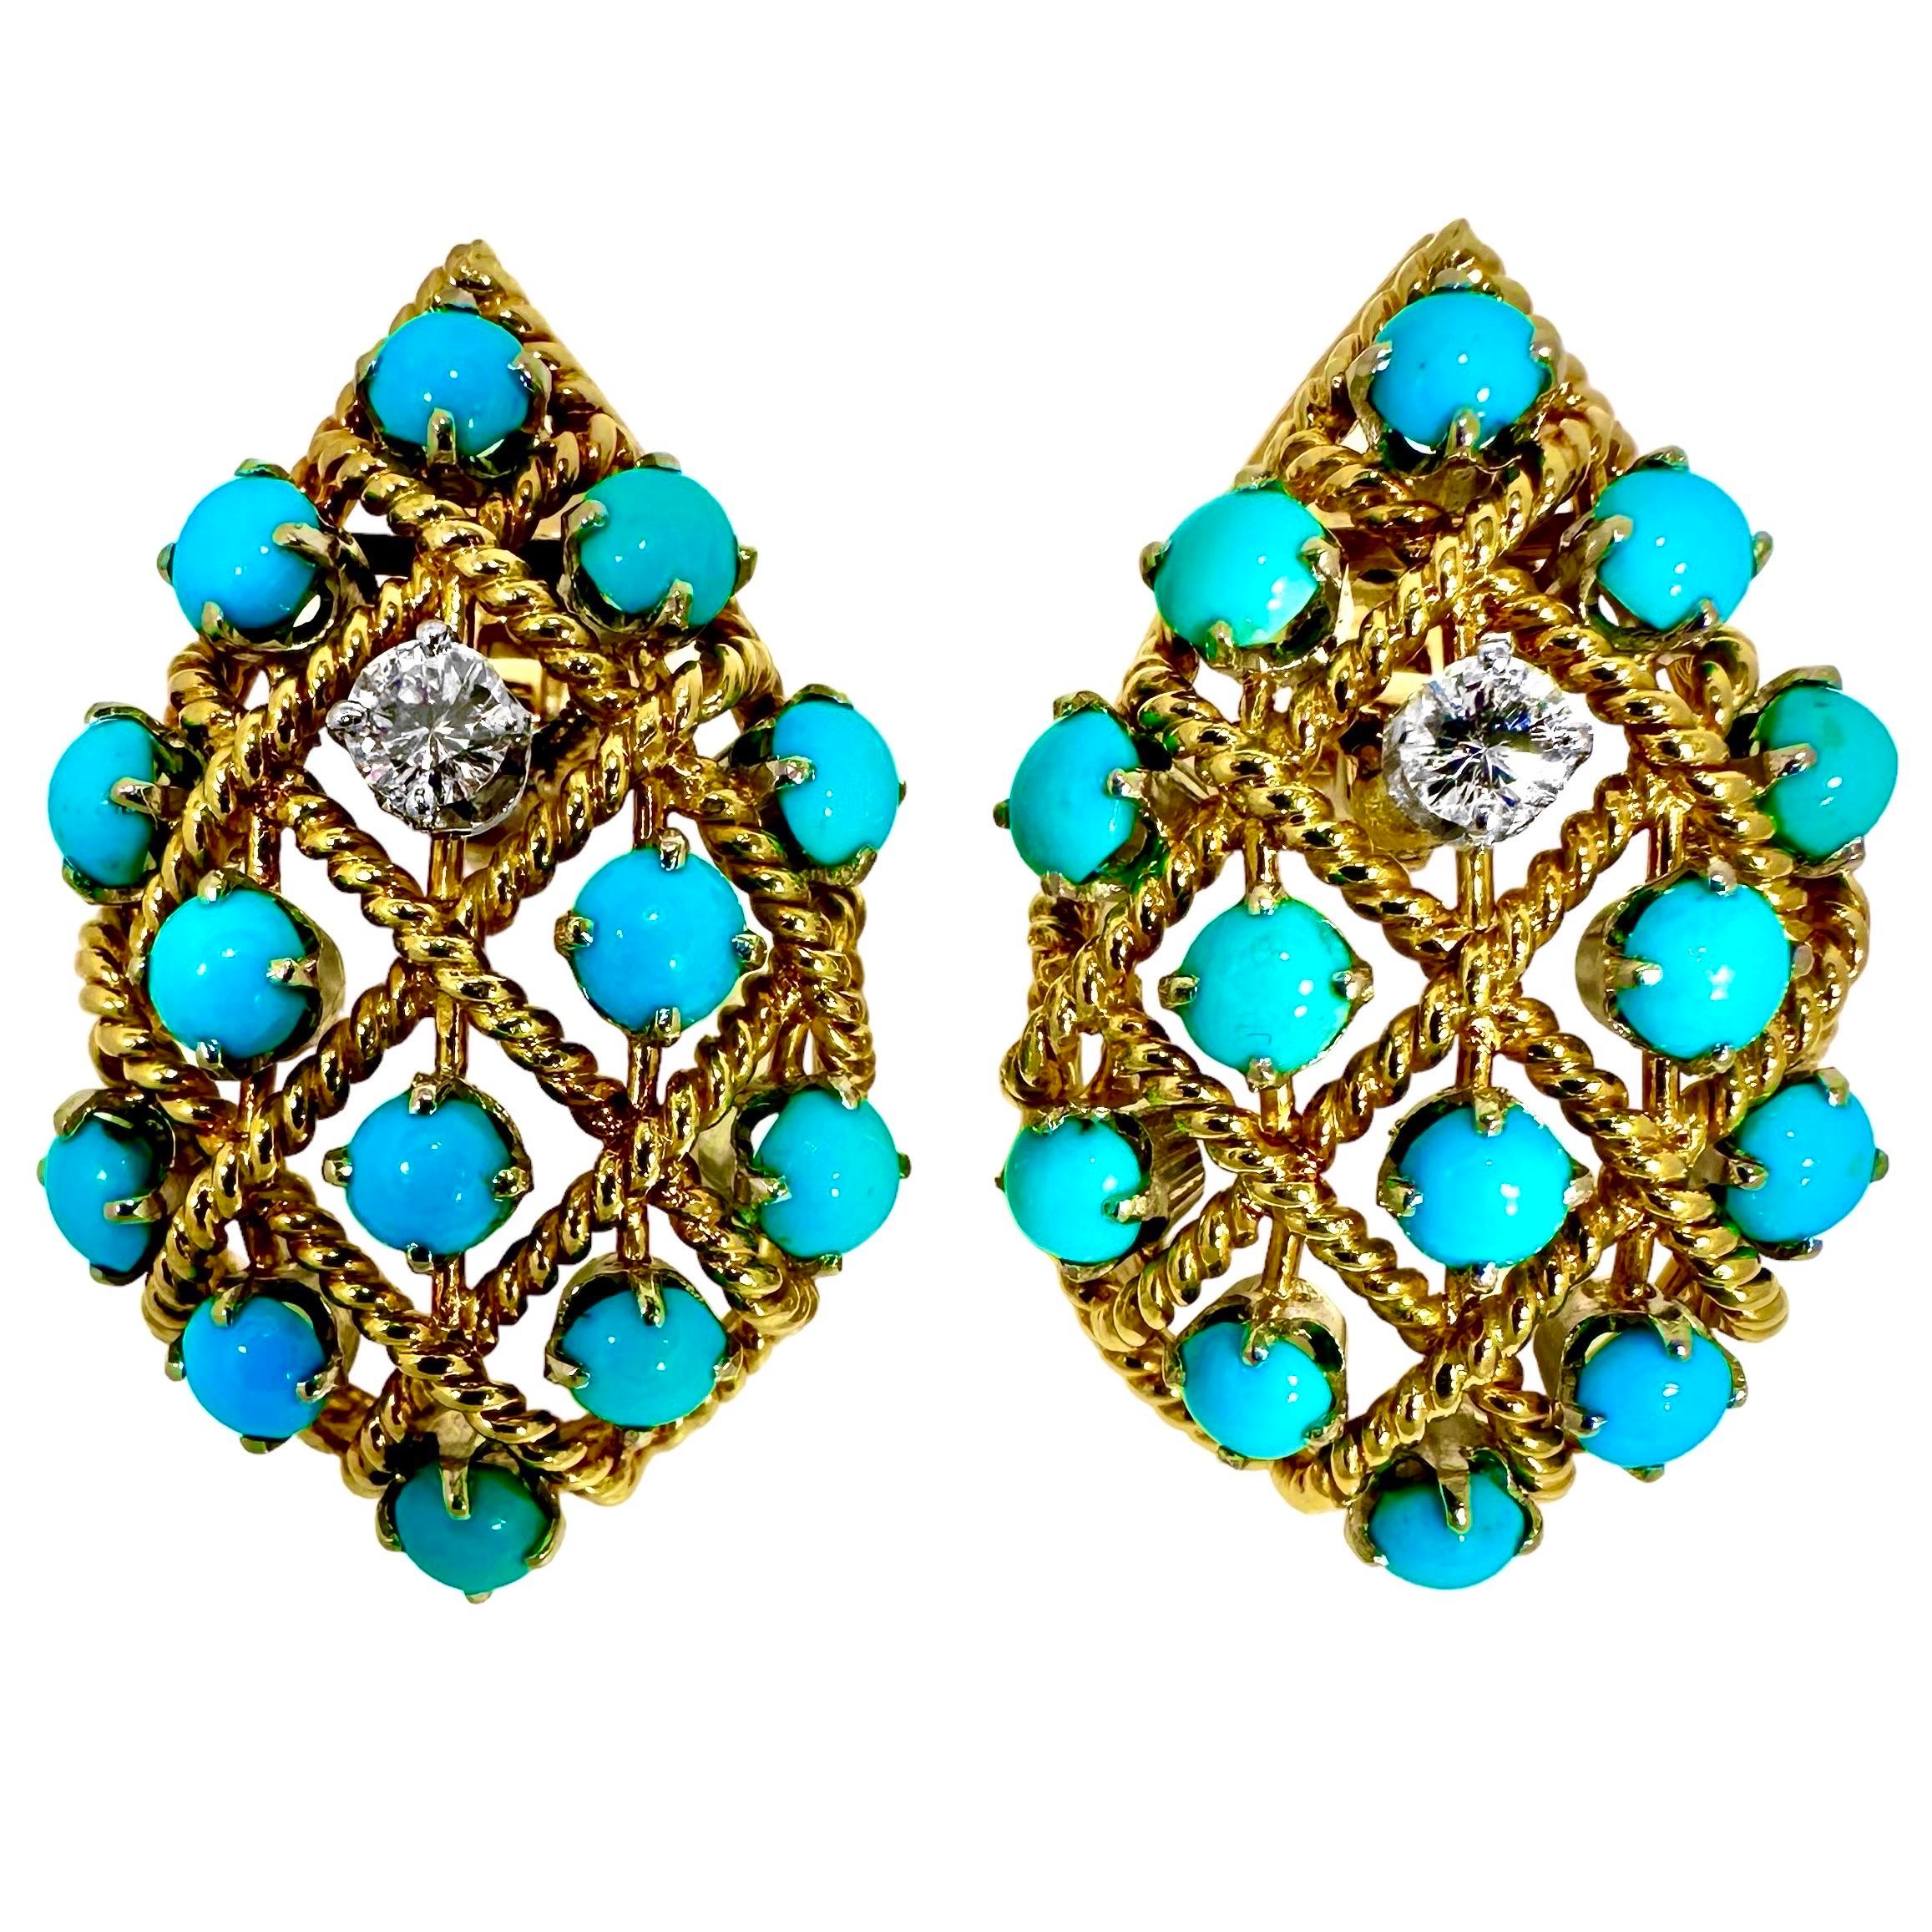 These large, pear shaped, open lattice work design earrings were hand crafted in 18K yellow gold. They are delicate in appearance yet sizable enough to make a statement. Great for daytime wear or into the evening. Twenty six turquoise cabochons are